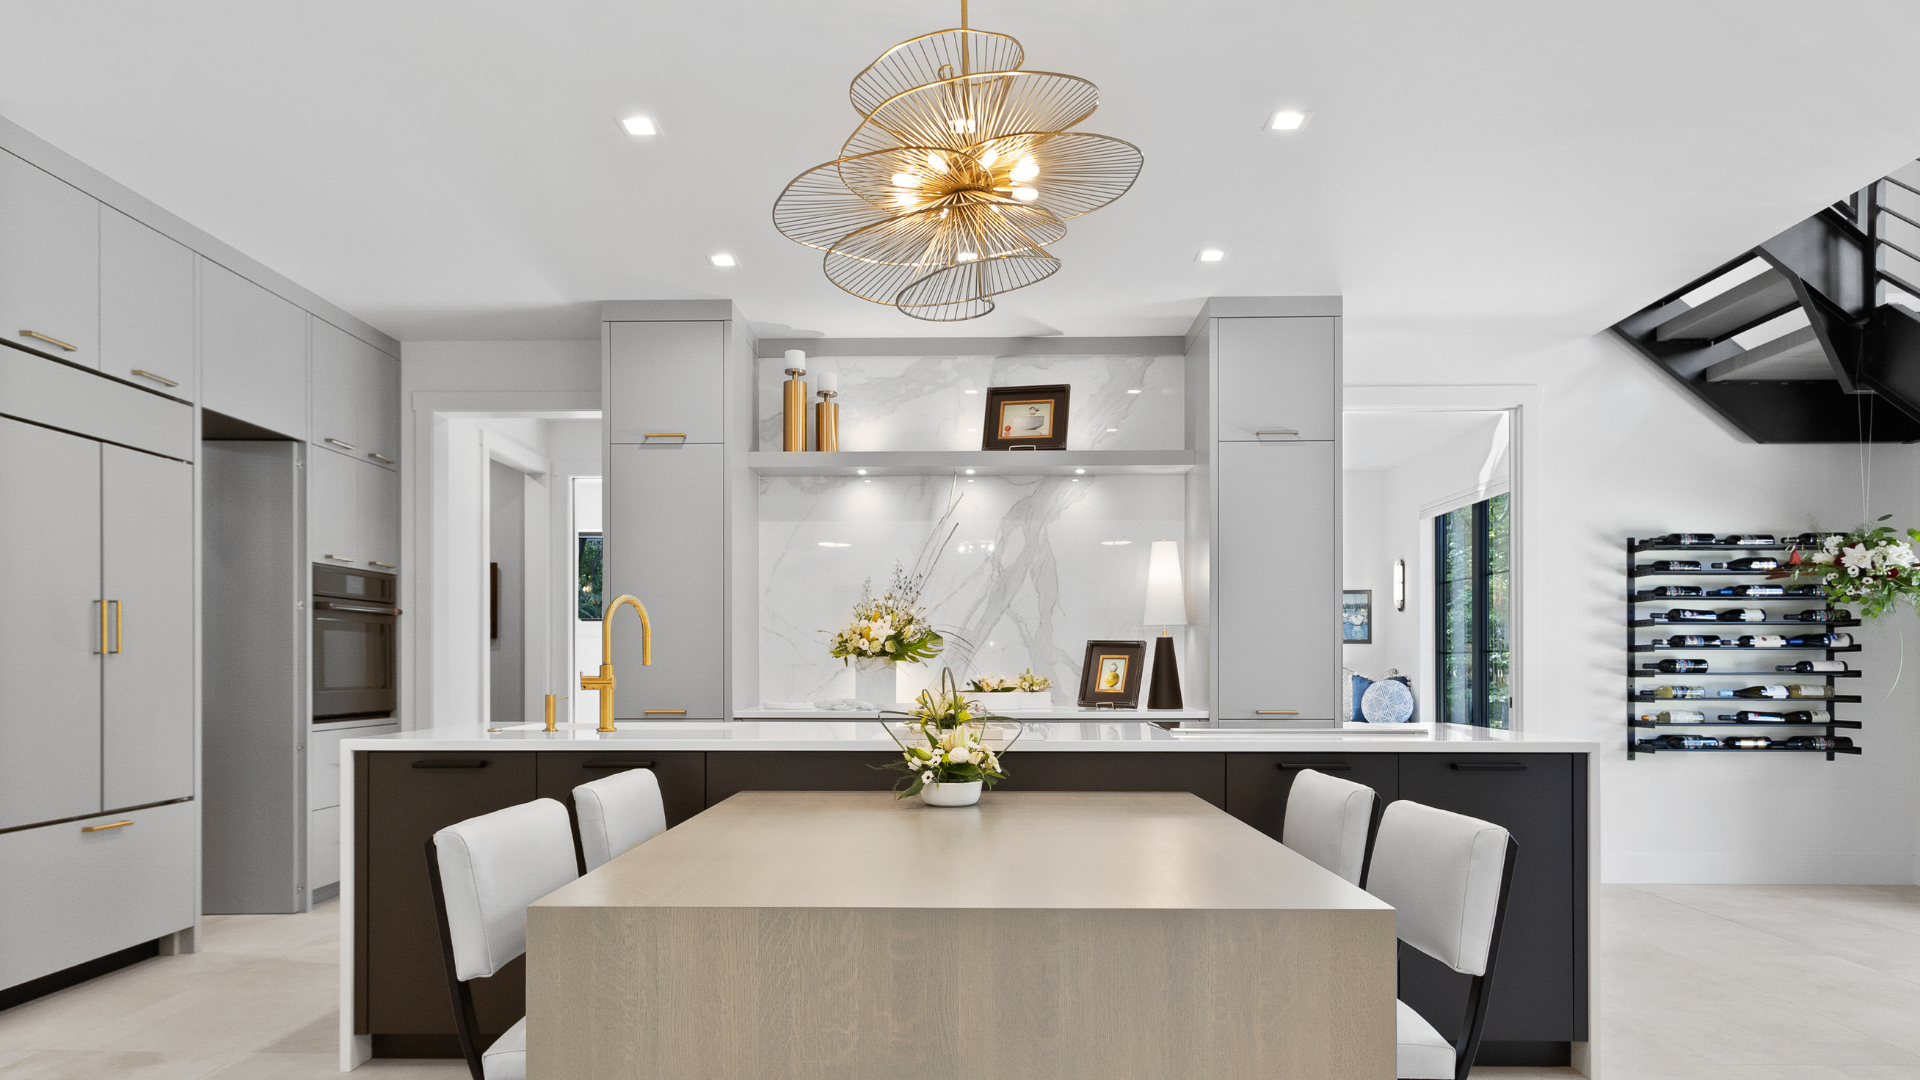 Bright modern kitchen and dining space with warm chandelier